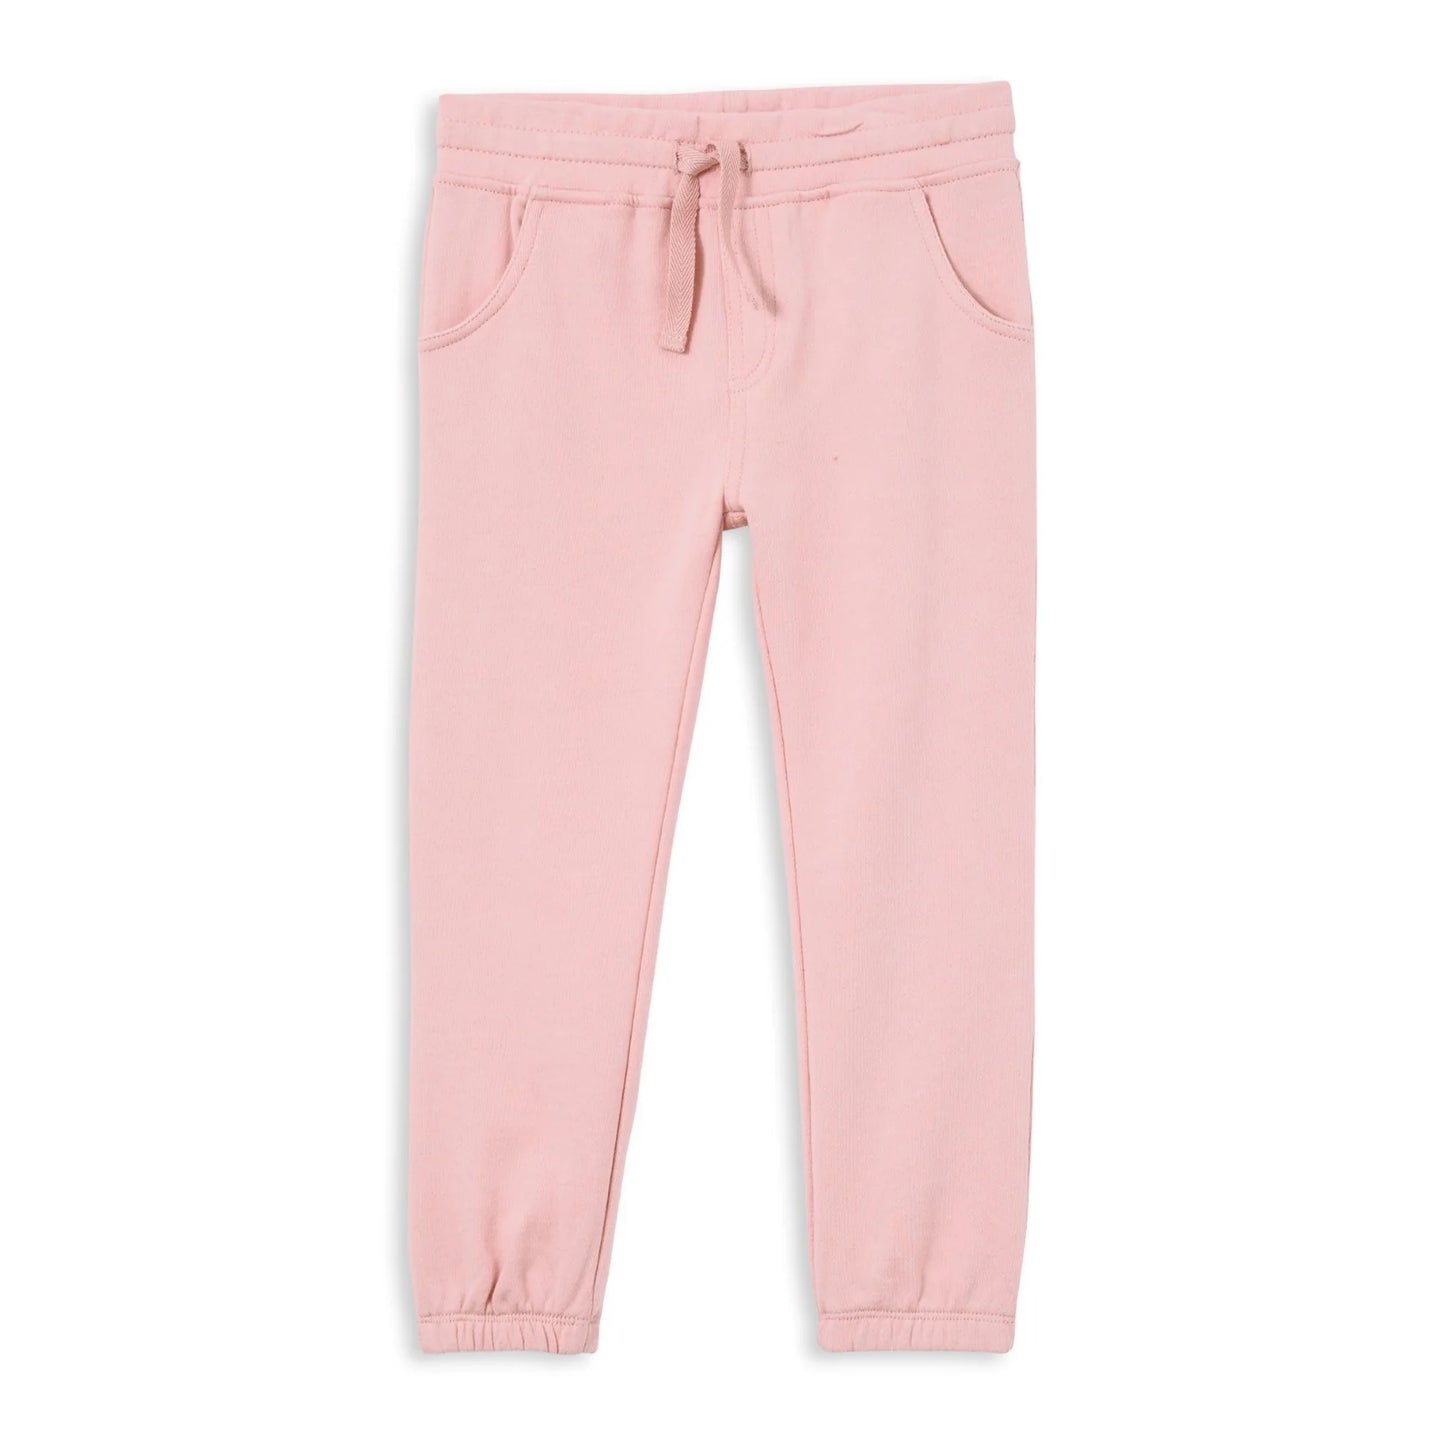 Track Pant - Nude Pink